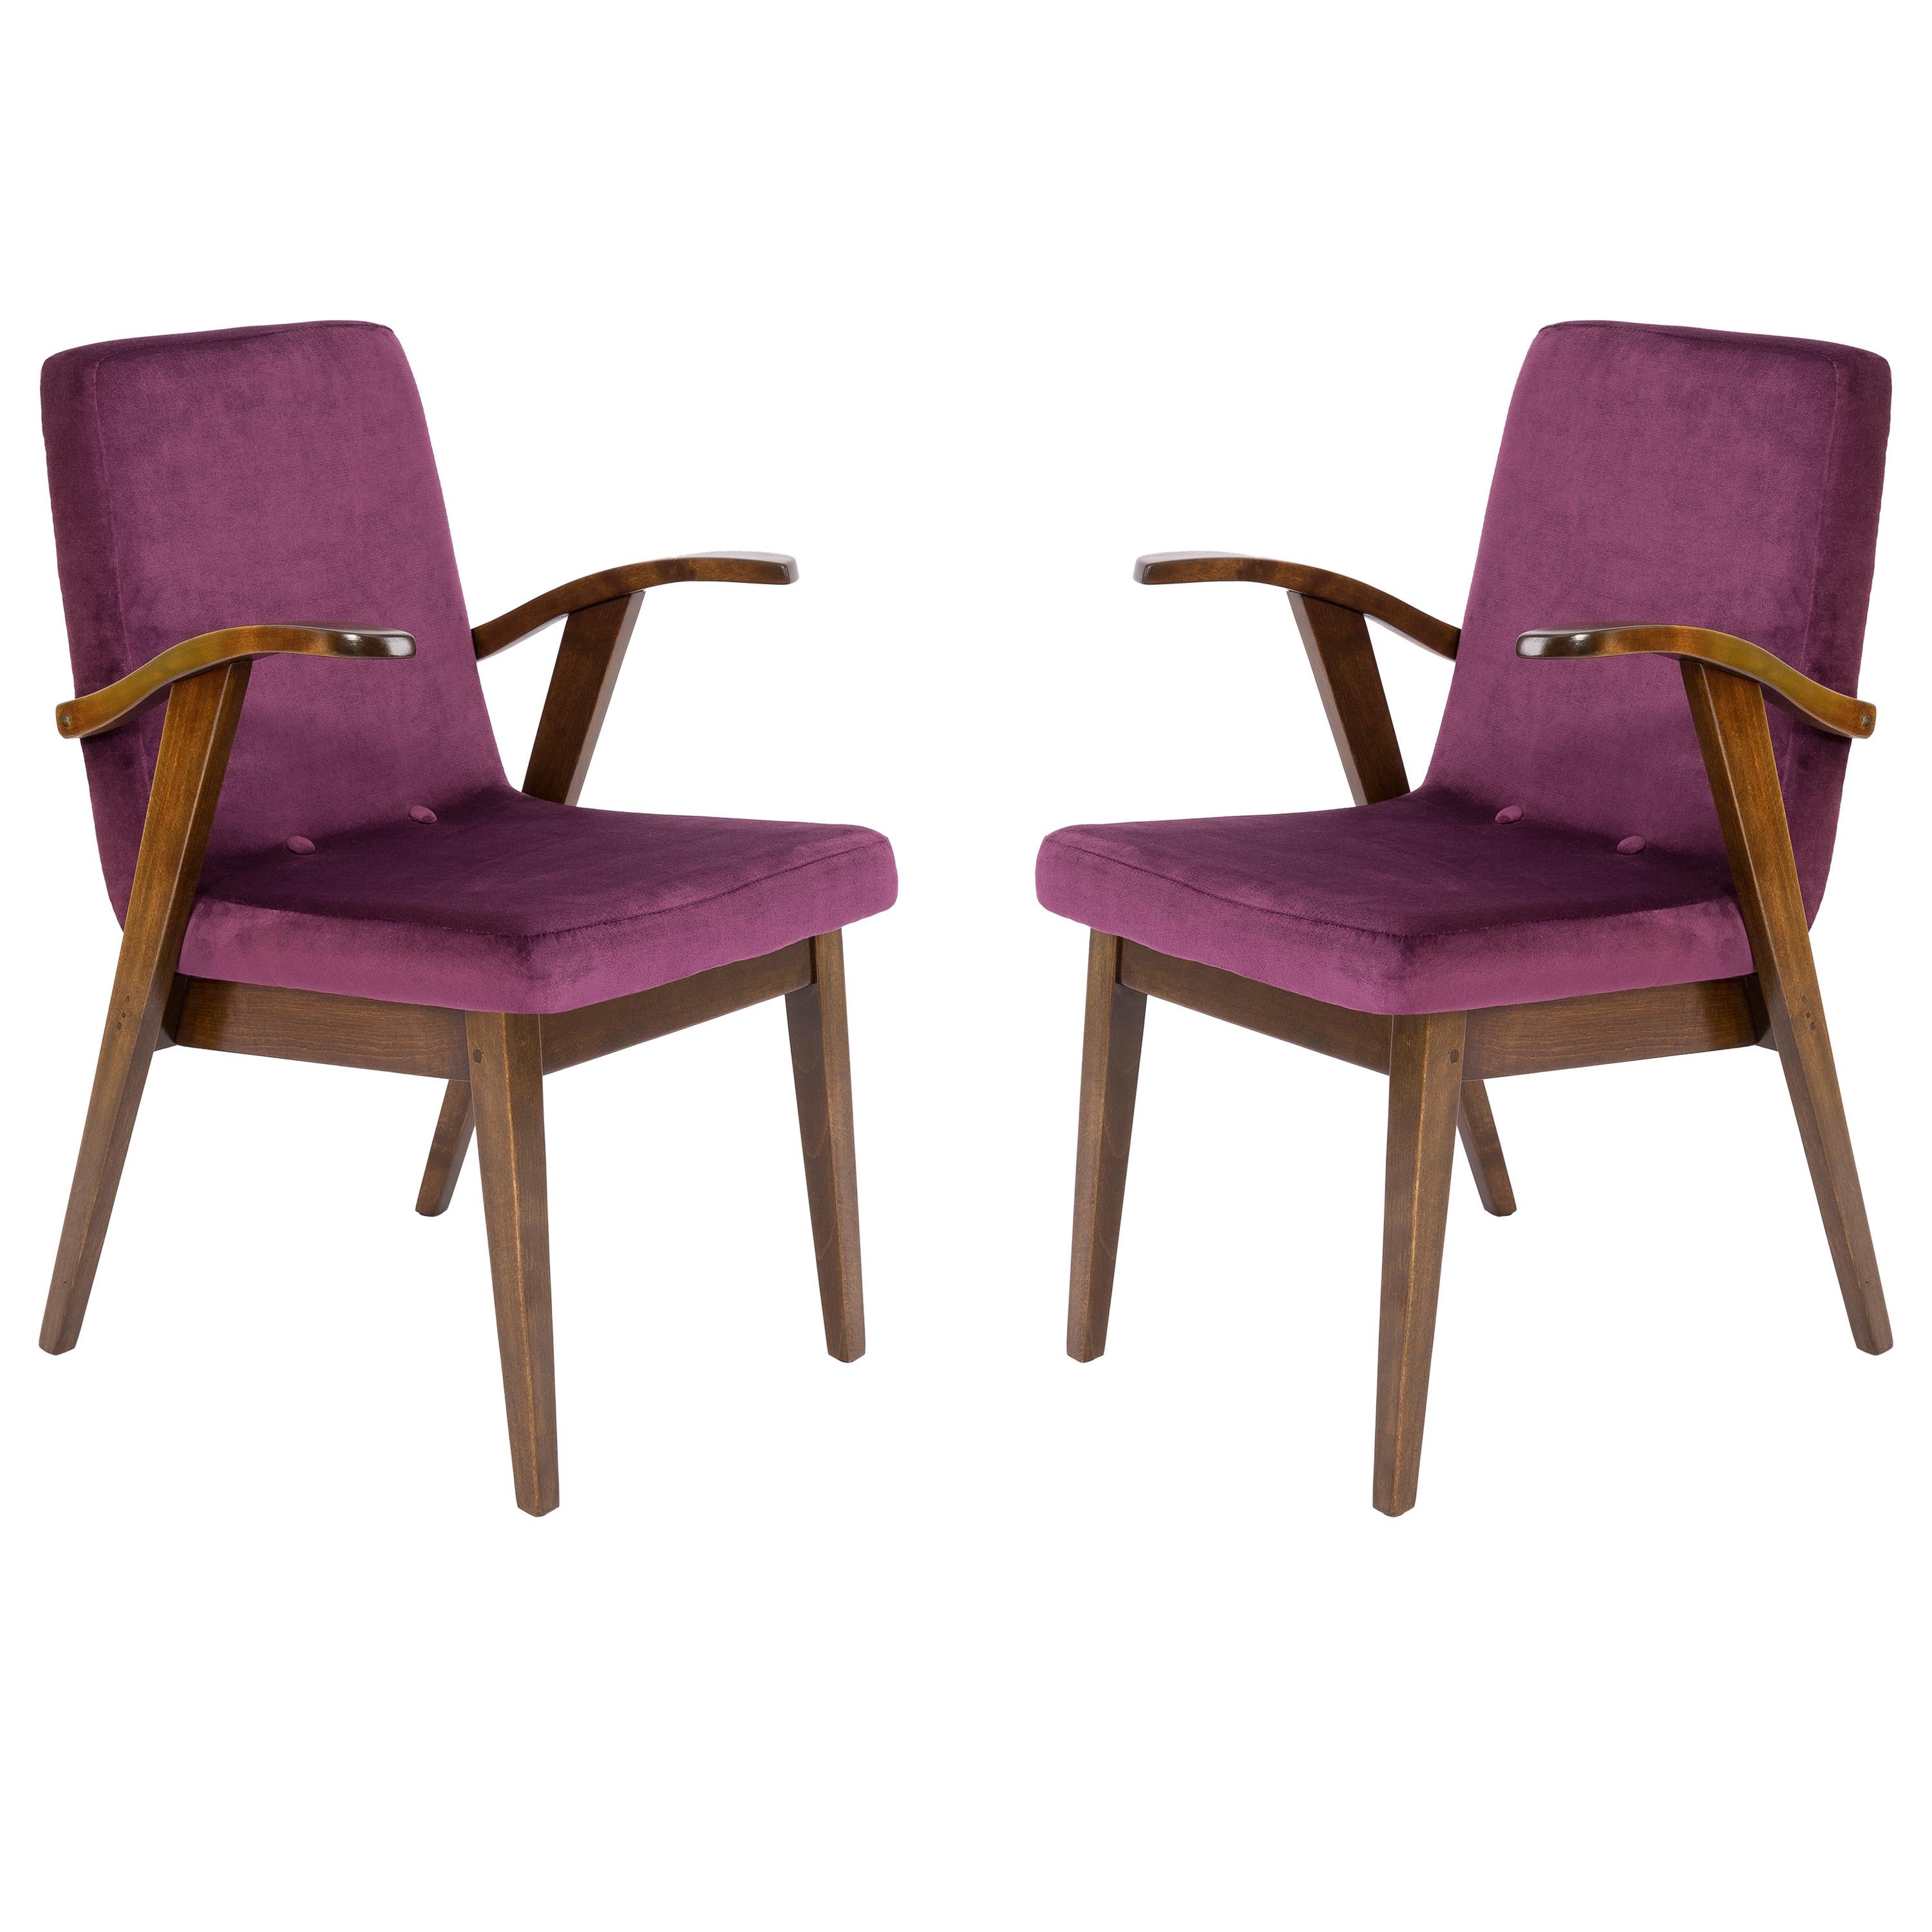 Set of Two 20th Century Vintage Plum Violet Armchair by Mieczyslaw Puchala 1960s